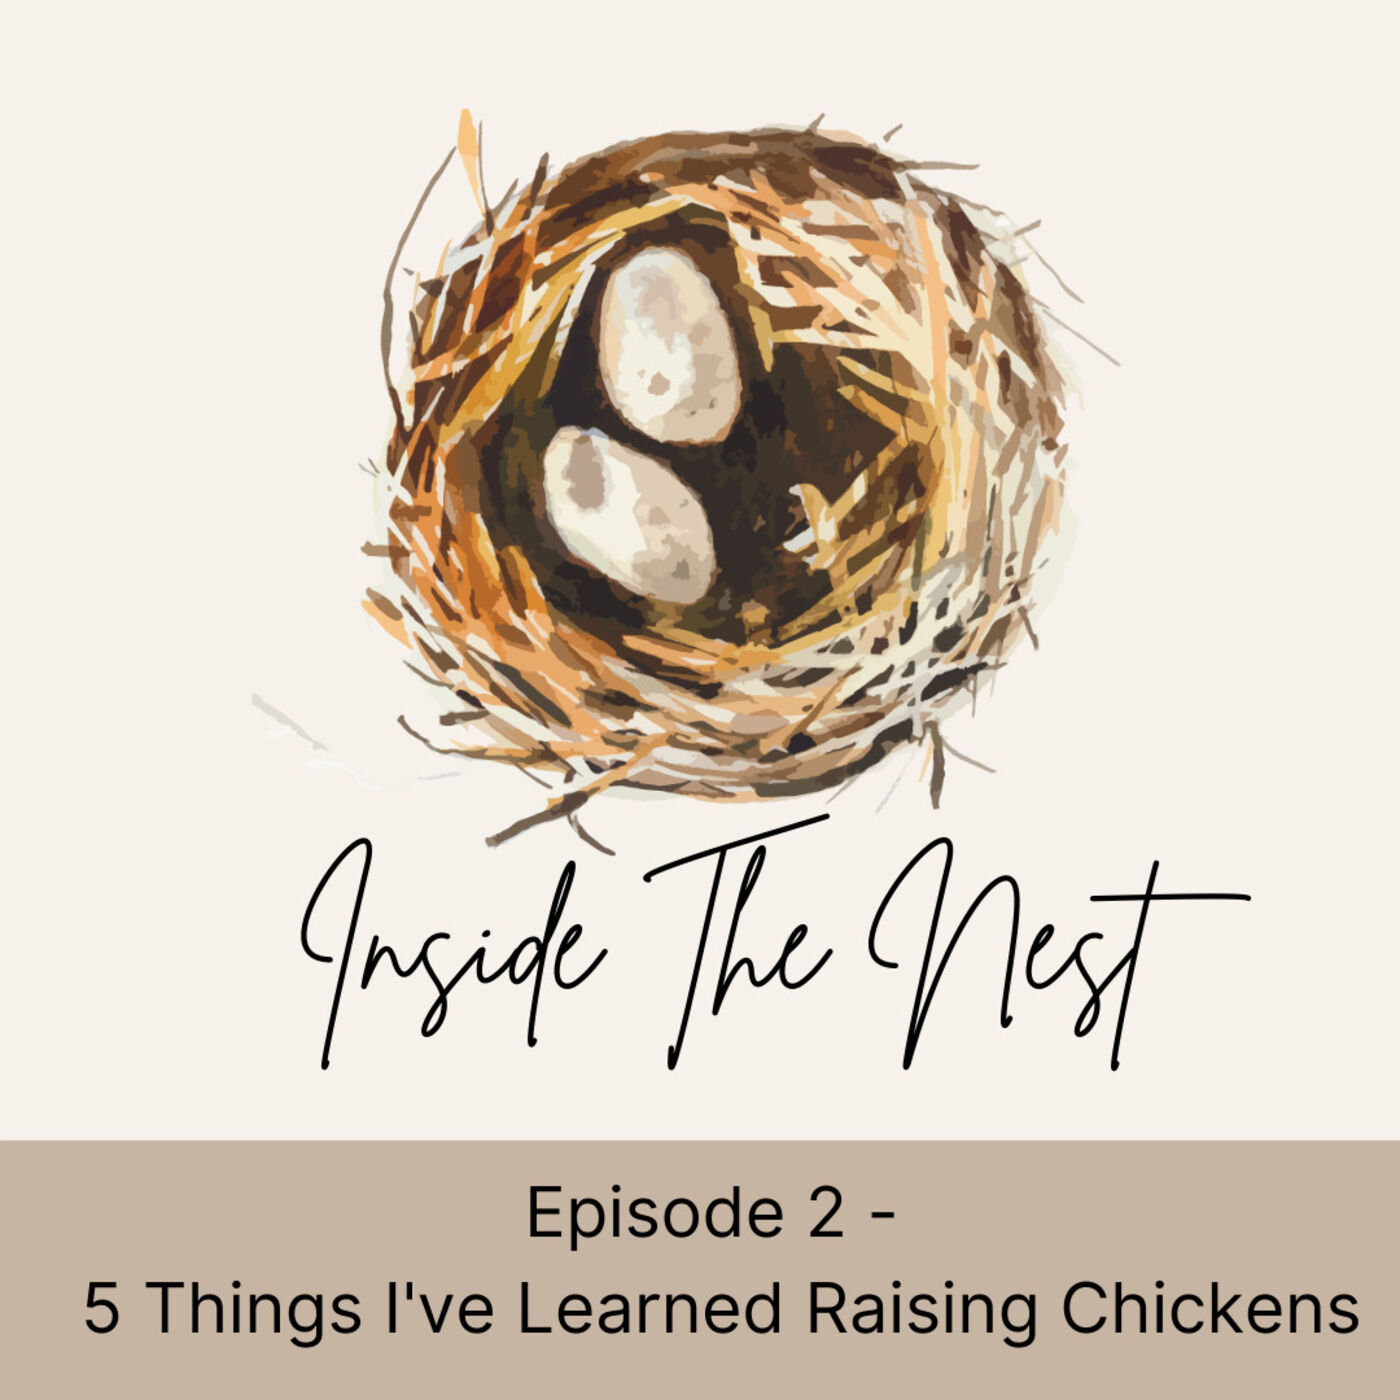 Inside the Nest Episode 2 - 5 Things I’ve Learned About Raising Chickens Image